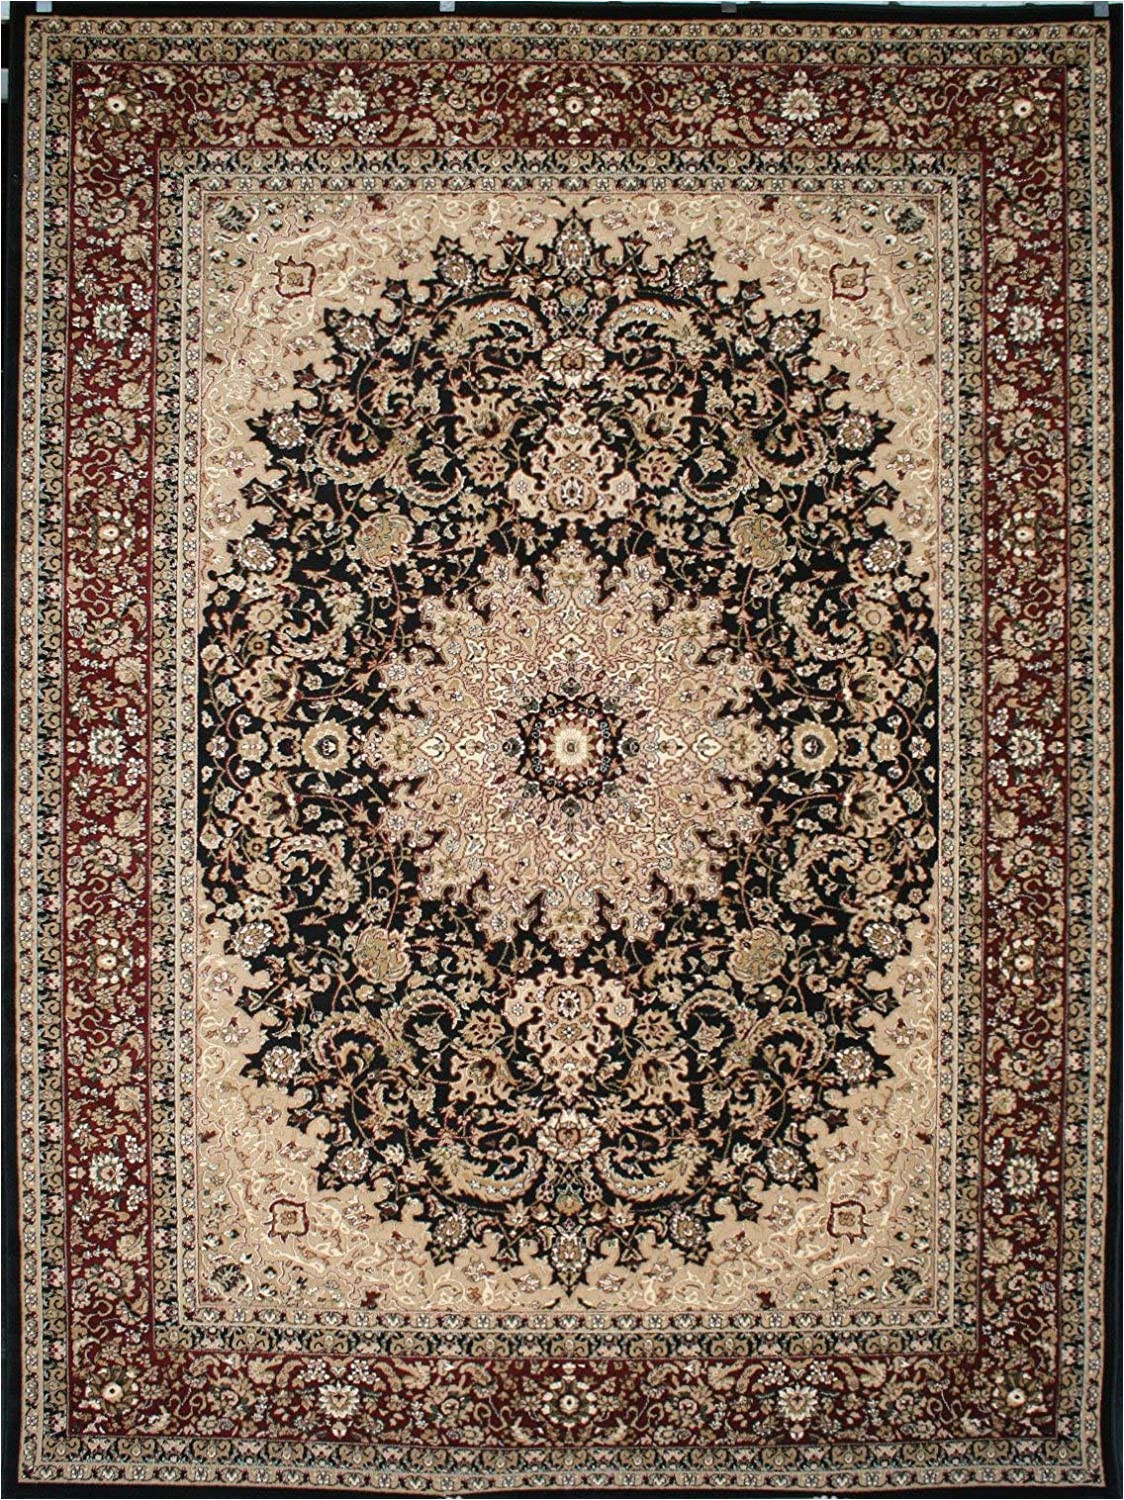 Large area Rugs at Ollies Feraghan New City Traditional isfahan Wool Persian area Rug 13 X 16 Black